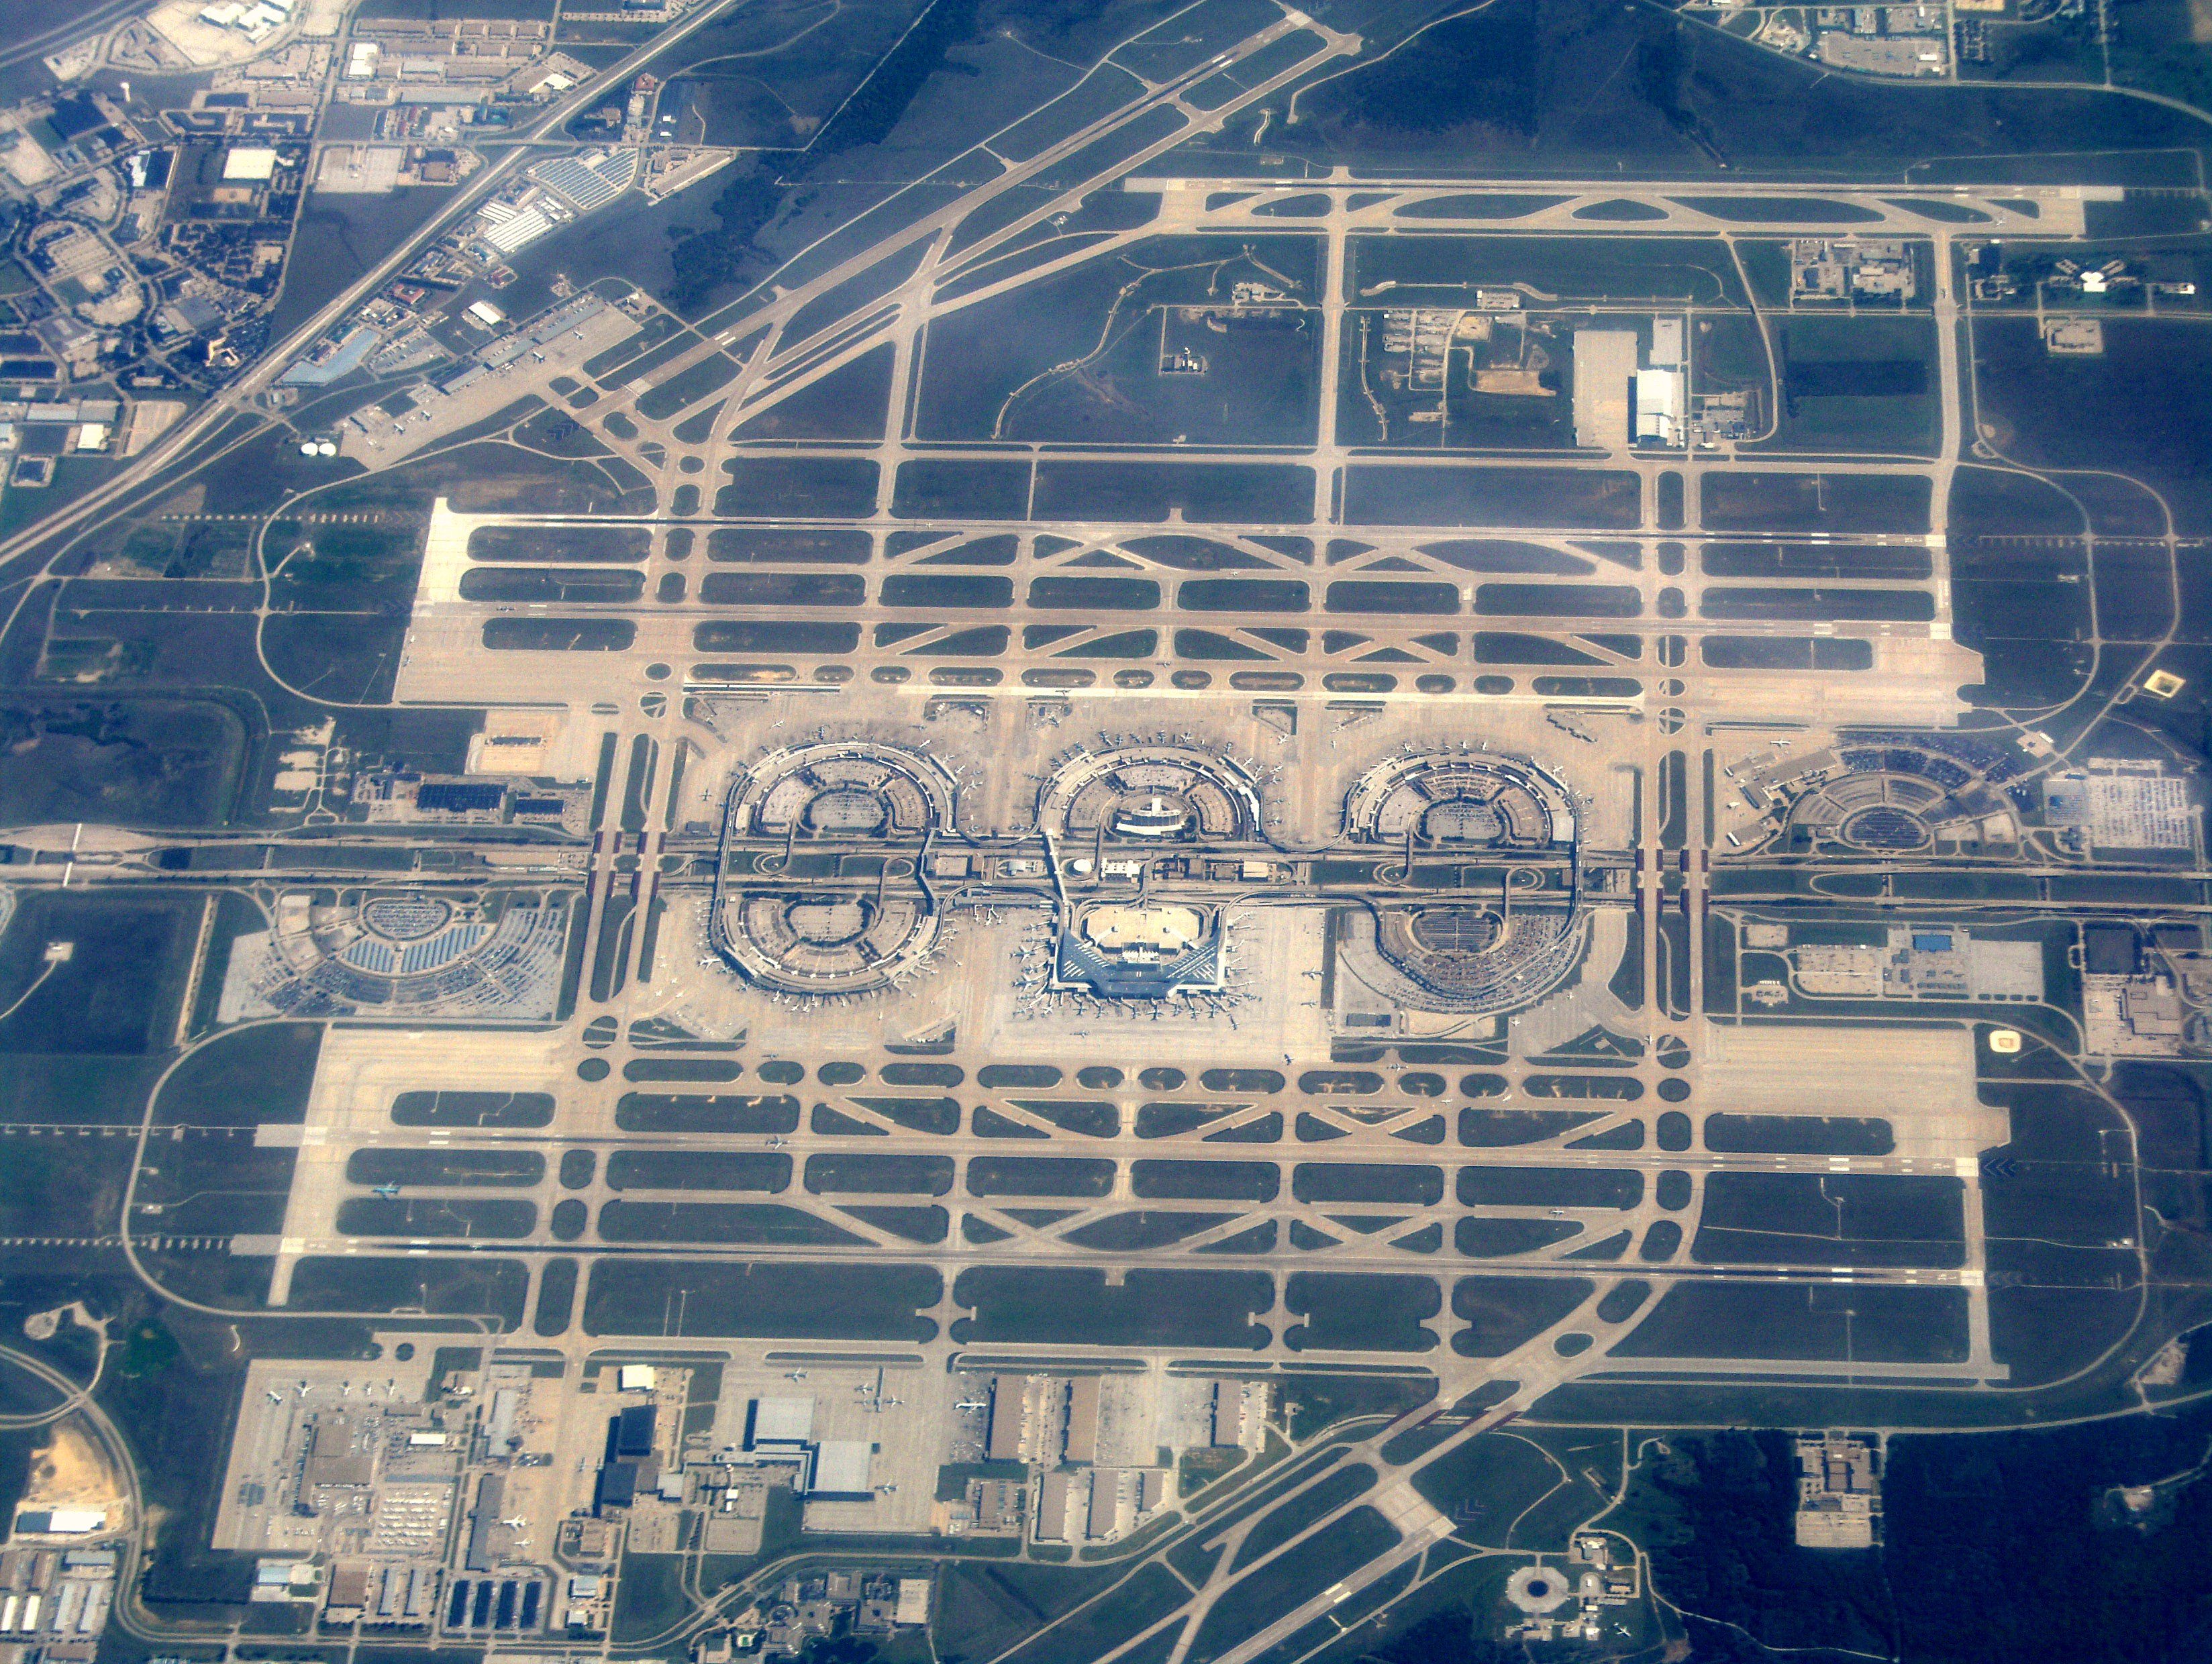 An aerial view of Dallas Fort Worth International Airport.